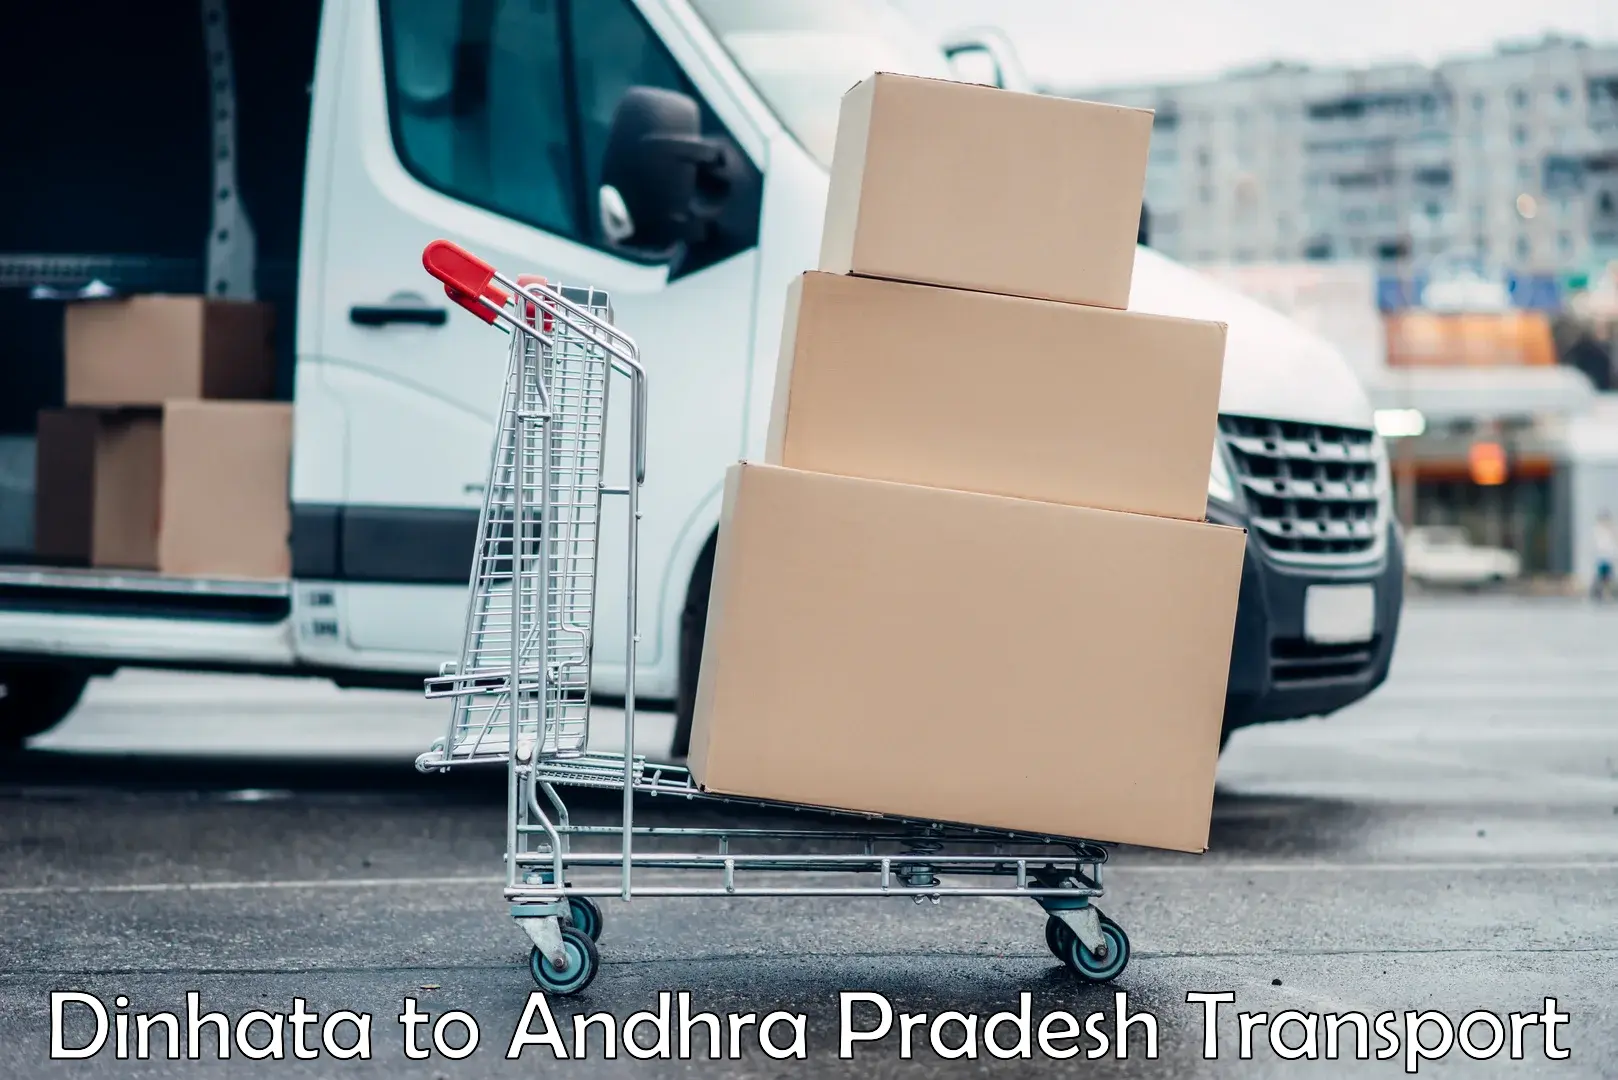 Truck transport companies in India Dinhata to Chitrada